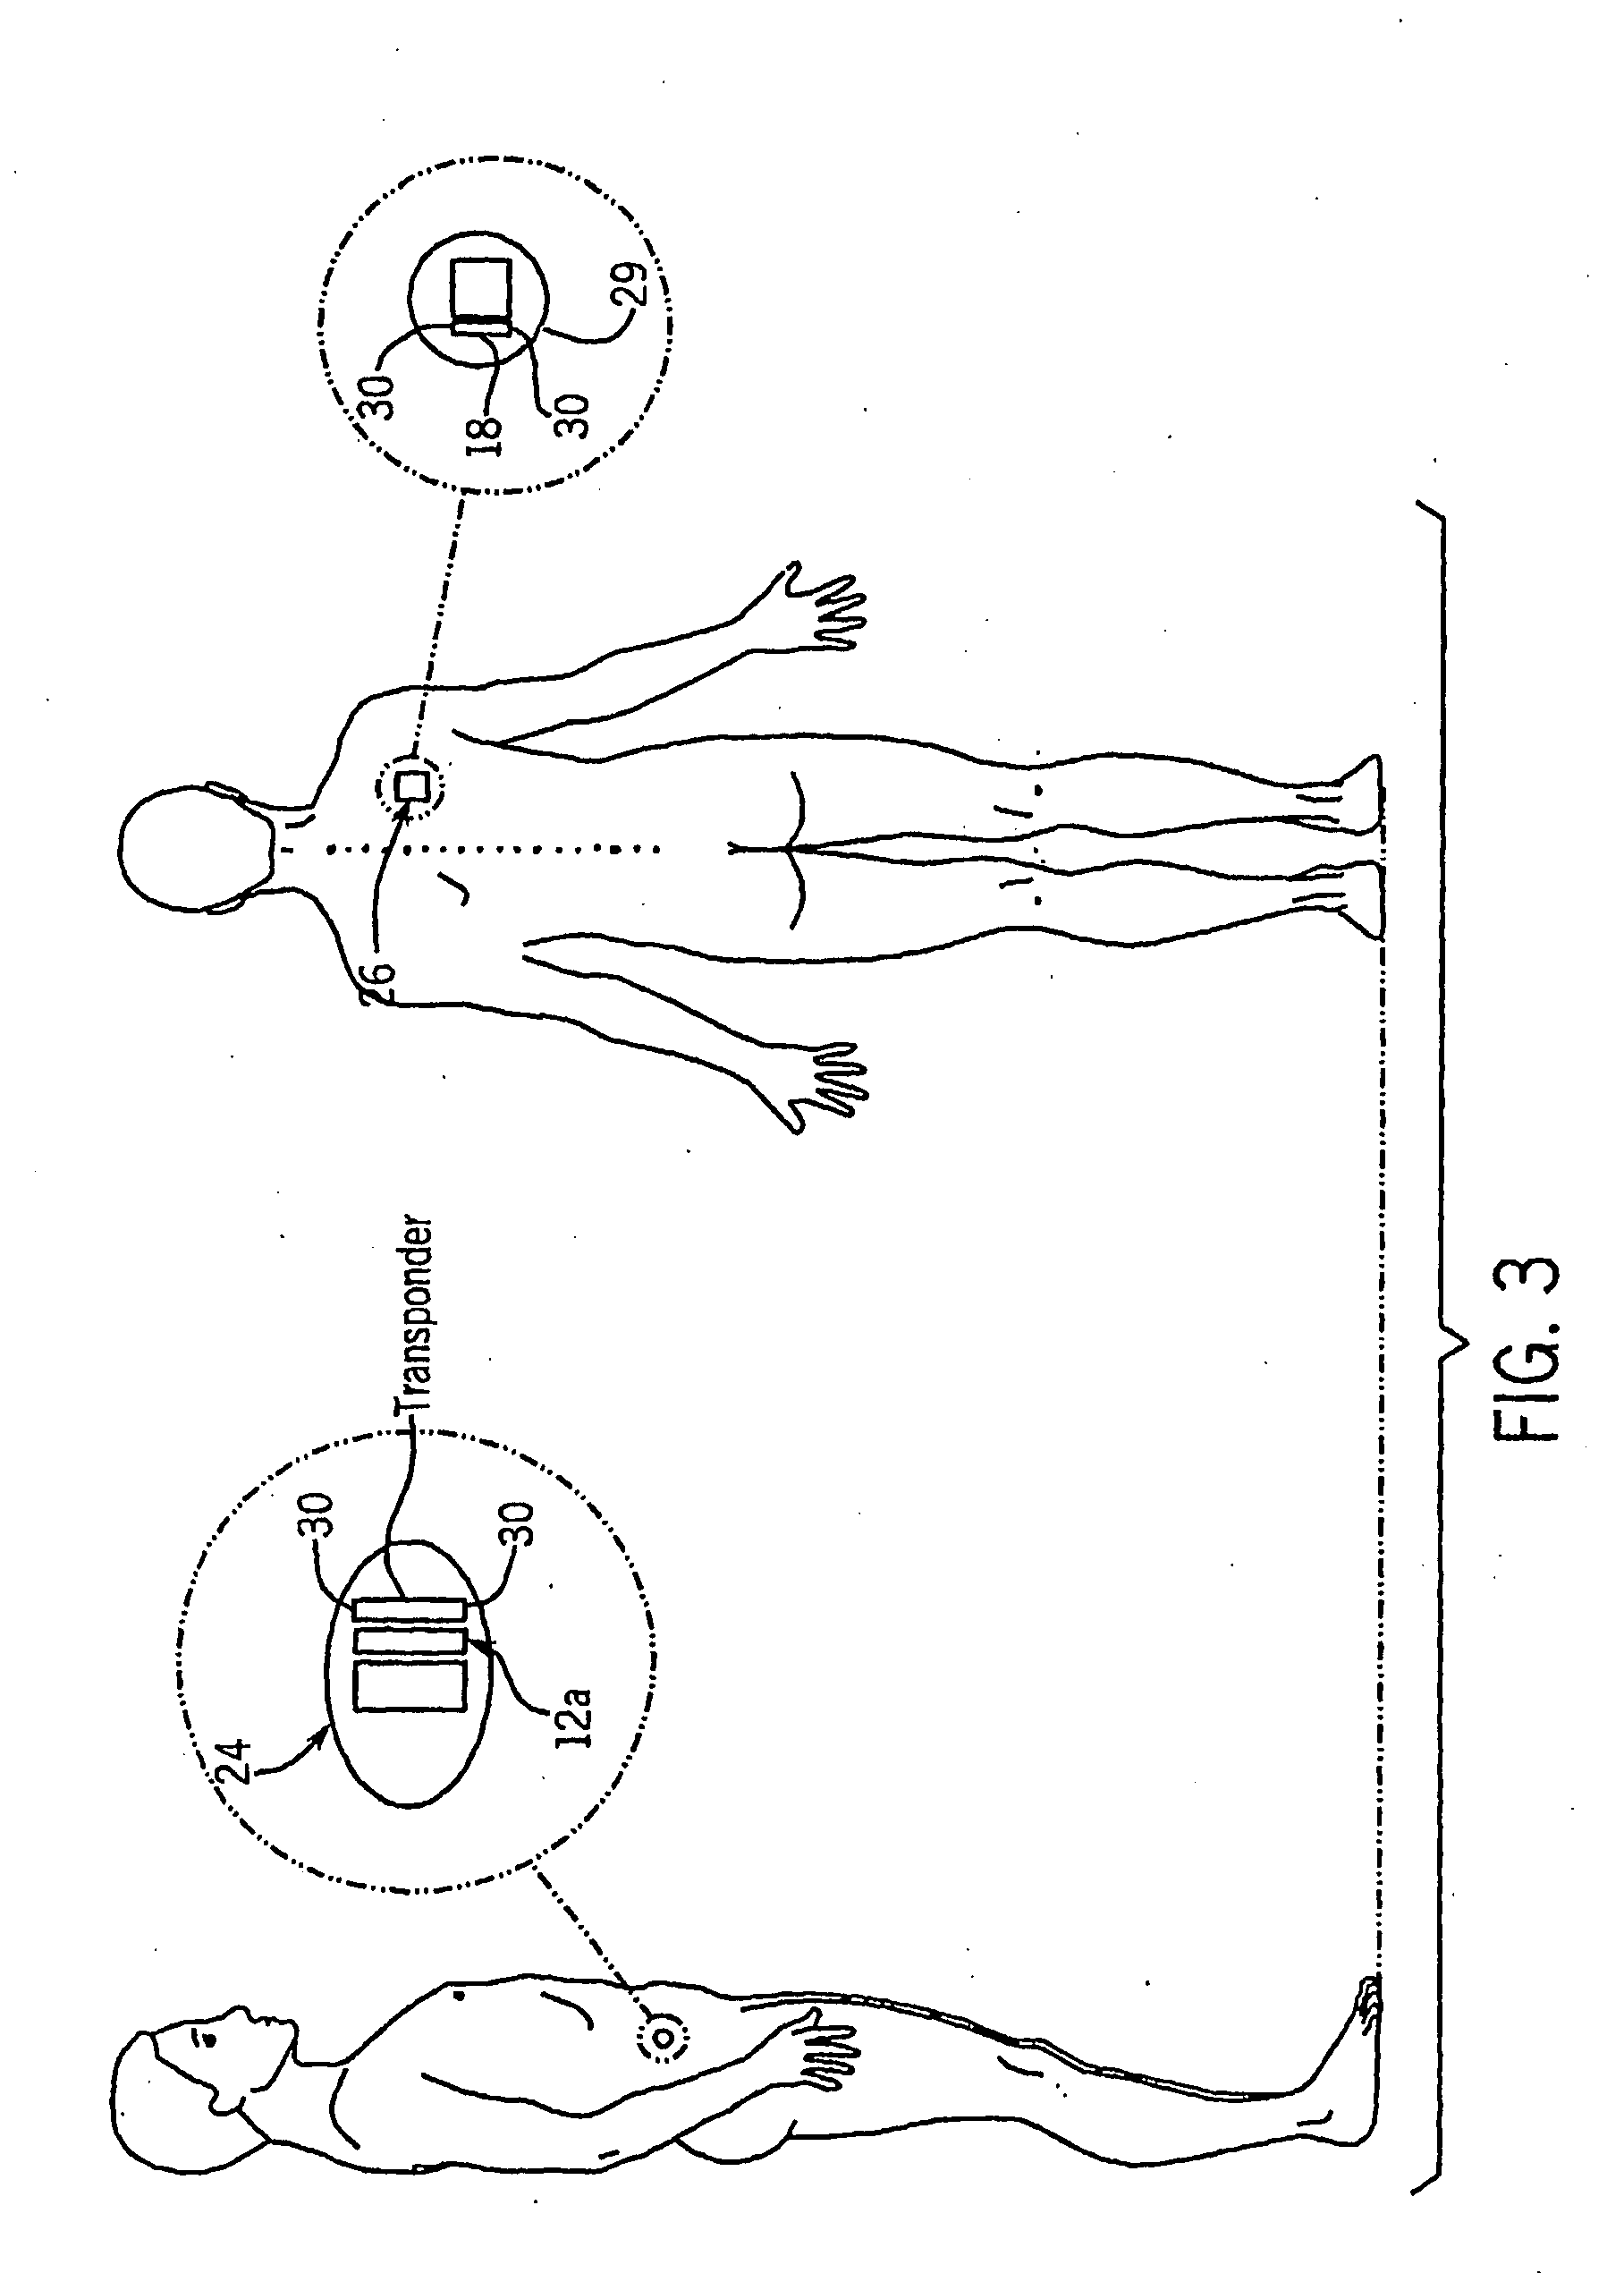 System for Monitoring a Physical Parameter of a Subject